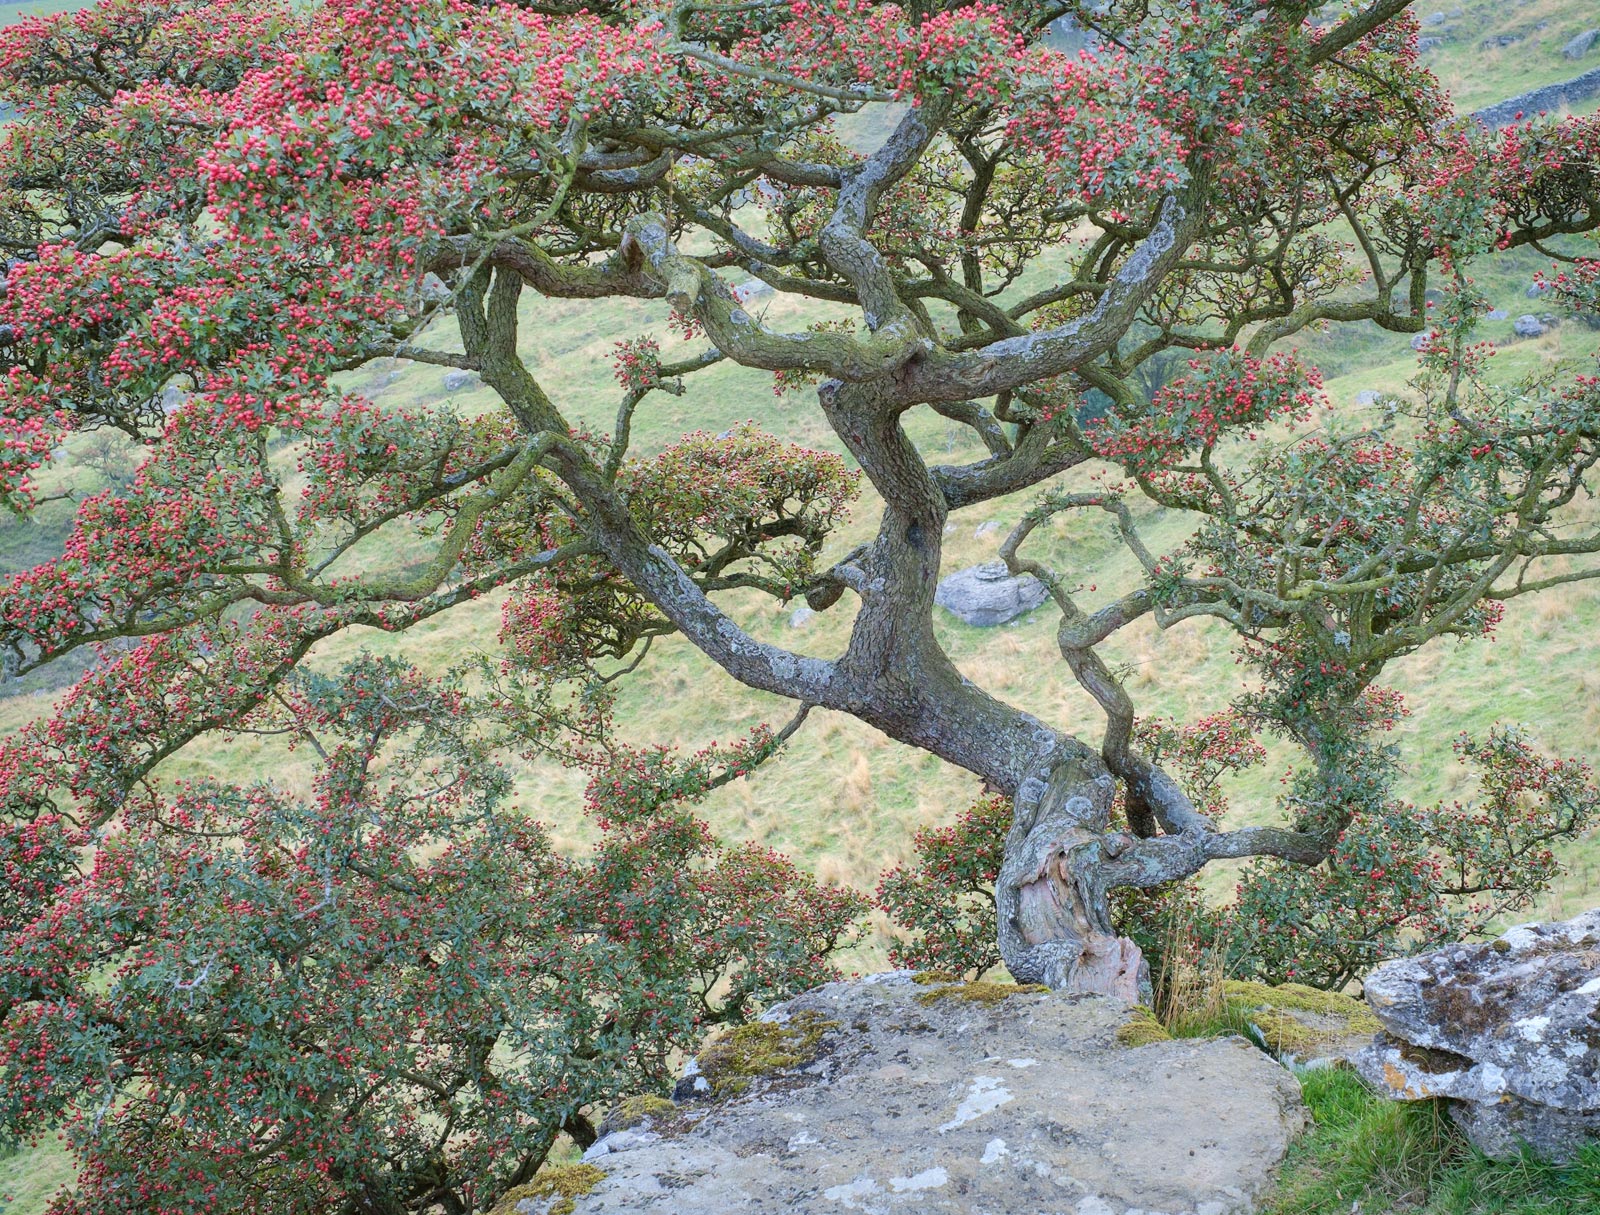 Branches and berries - Hawthorn tree at Norber erratics